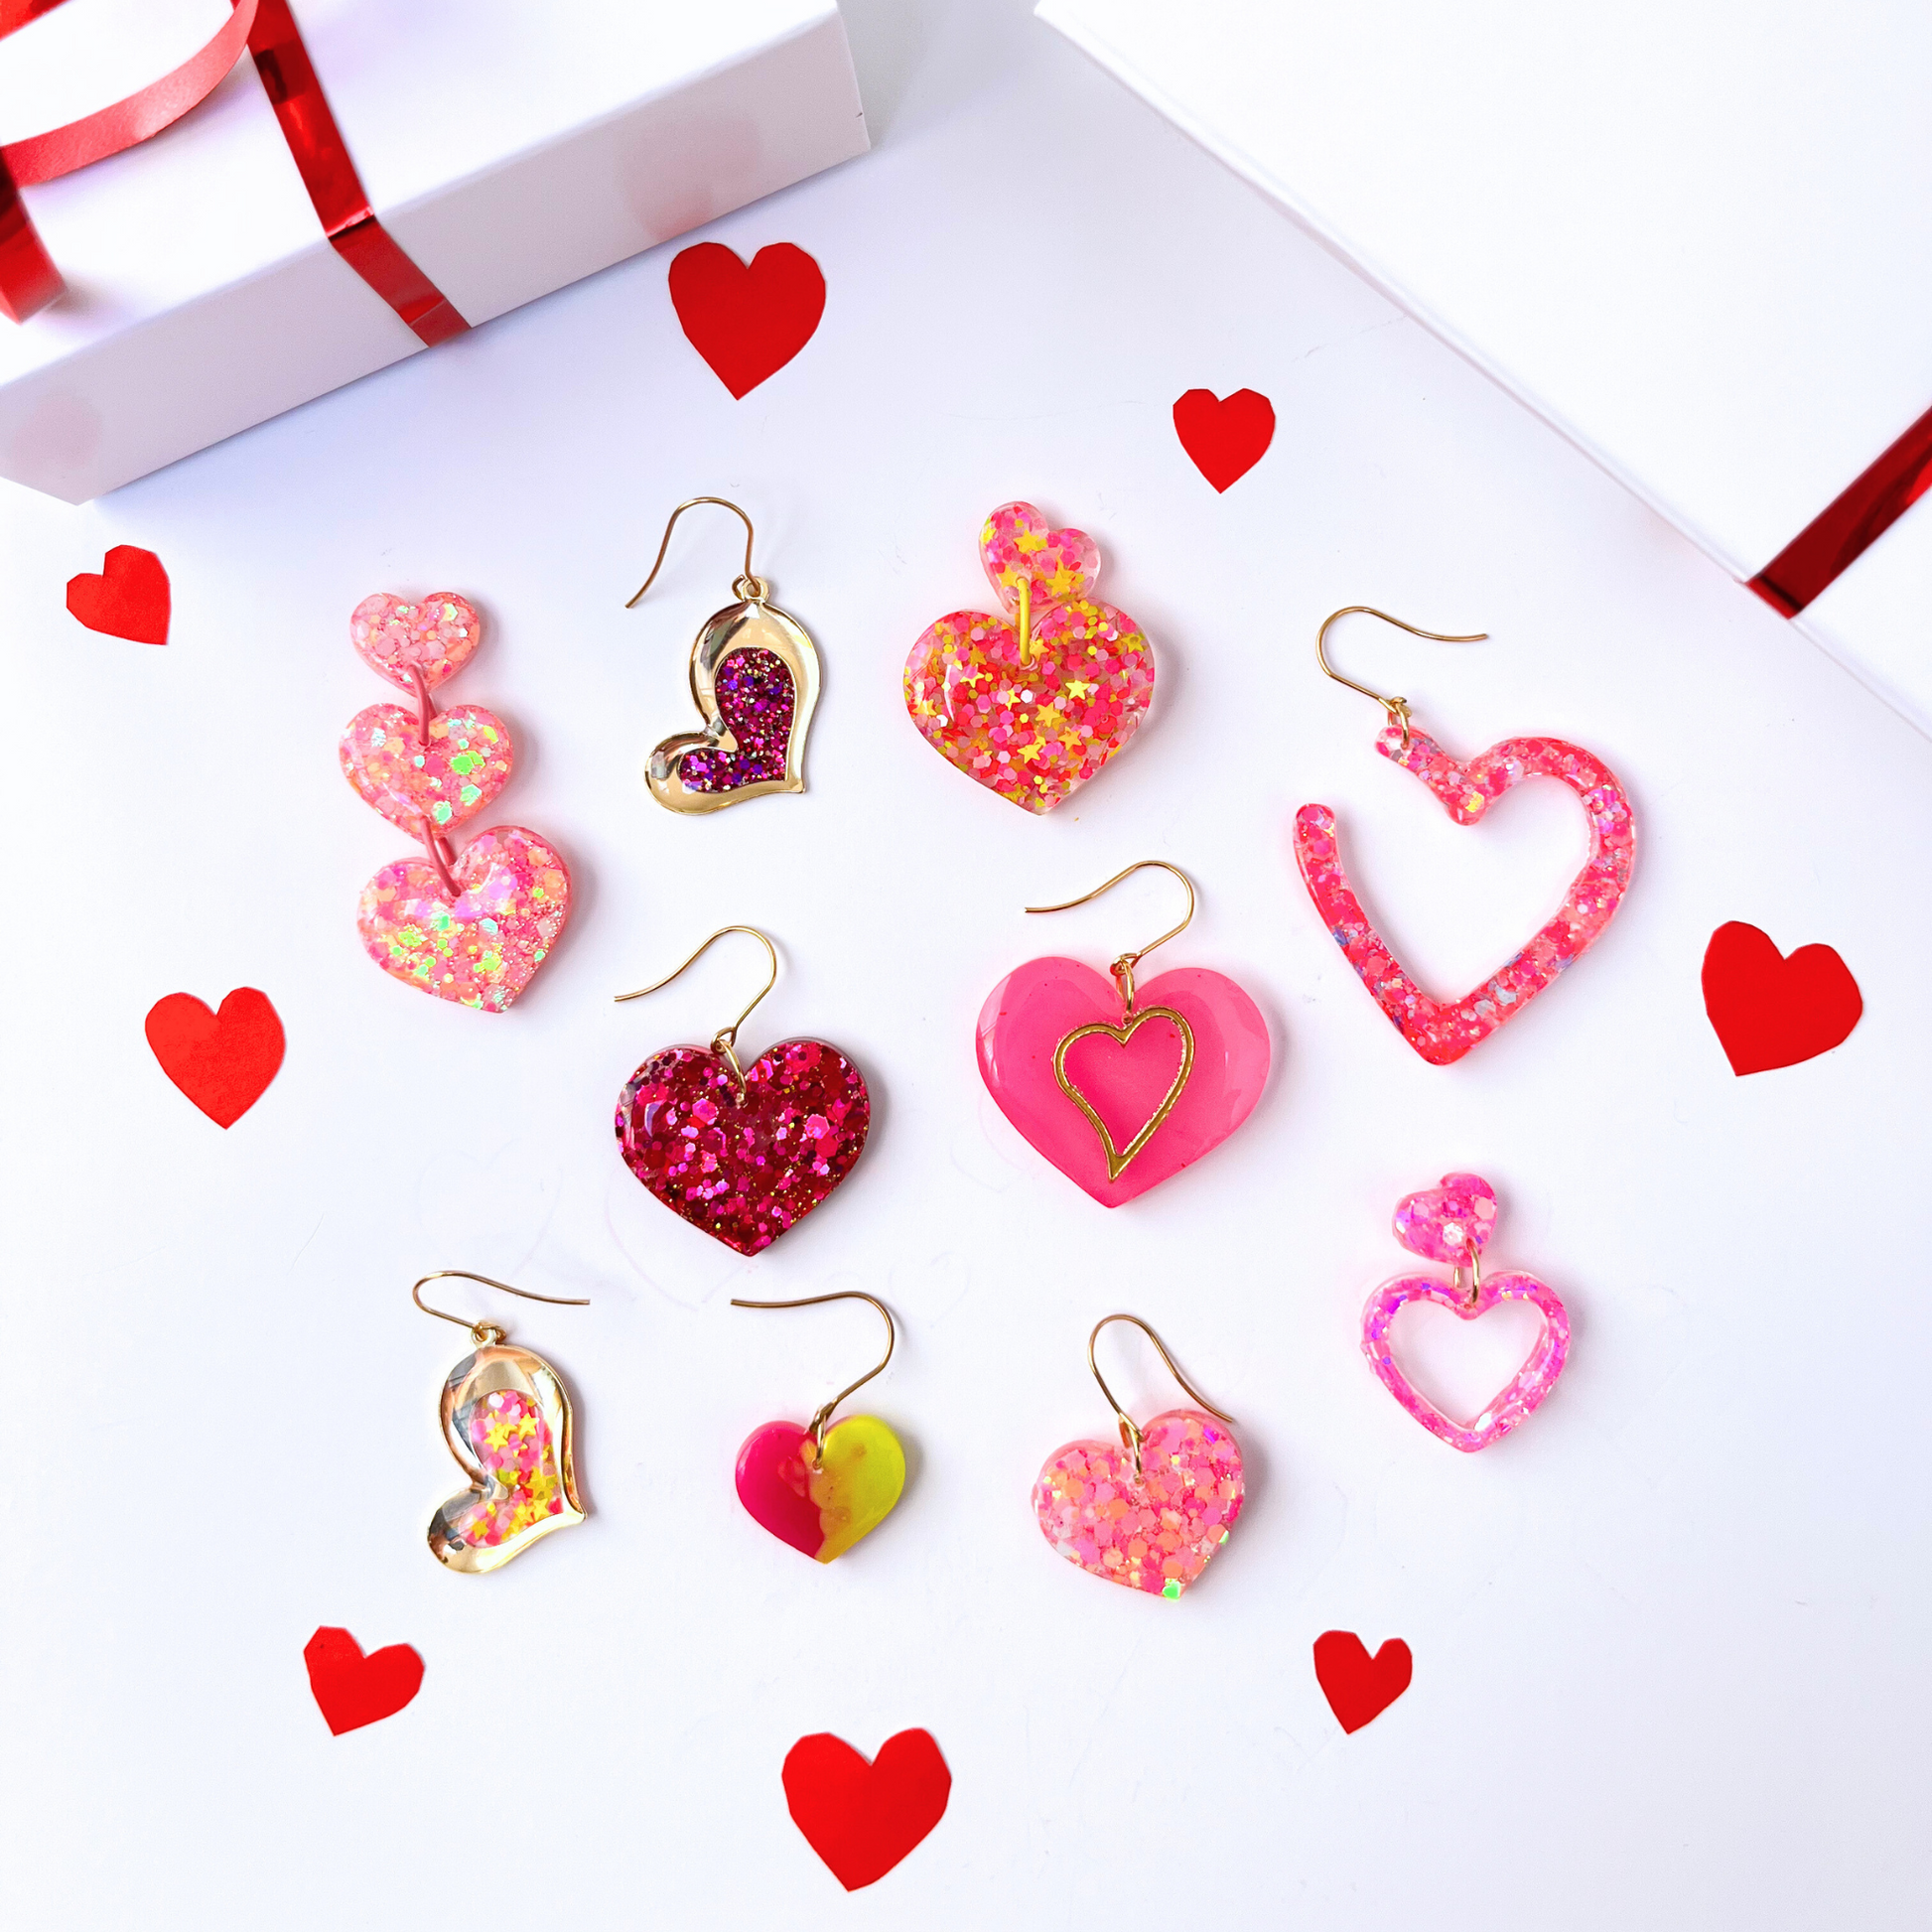 Colourful Statement Glitter Valentines Heart Earrings with Hypoallergenic Titanium Posts